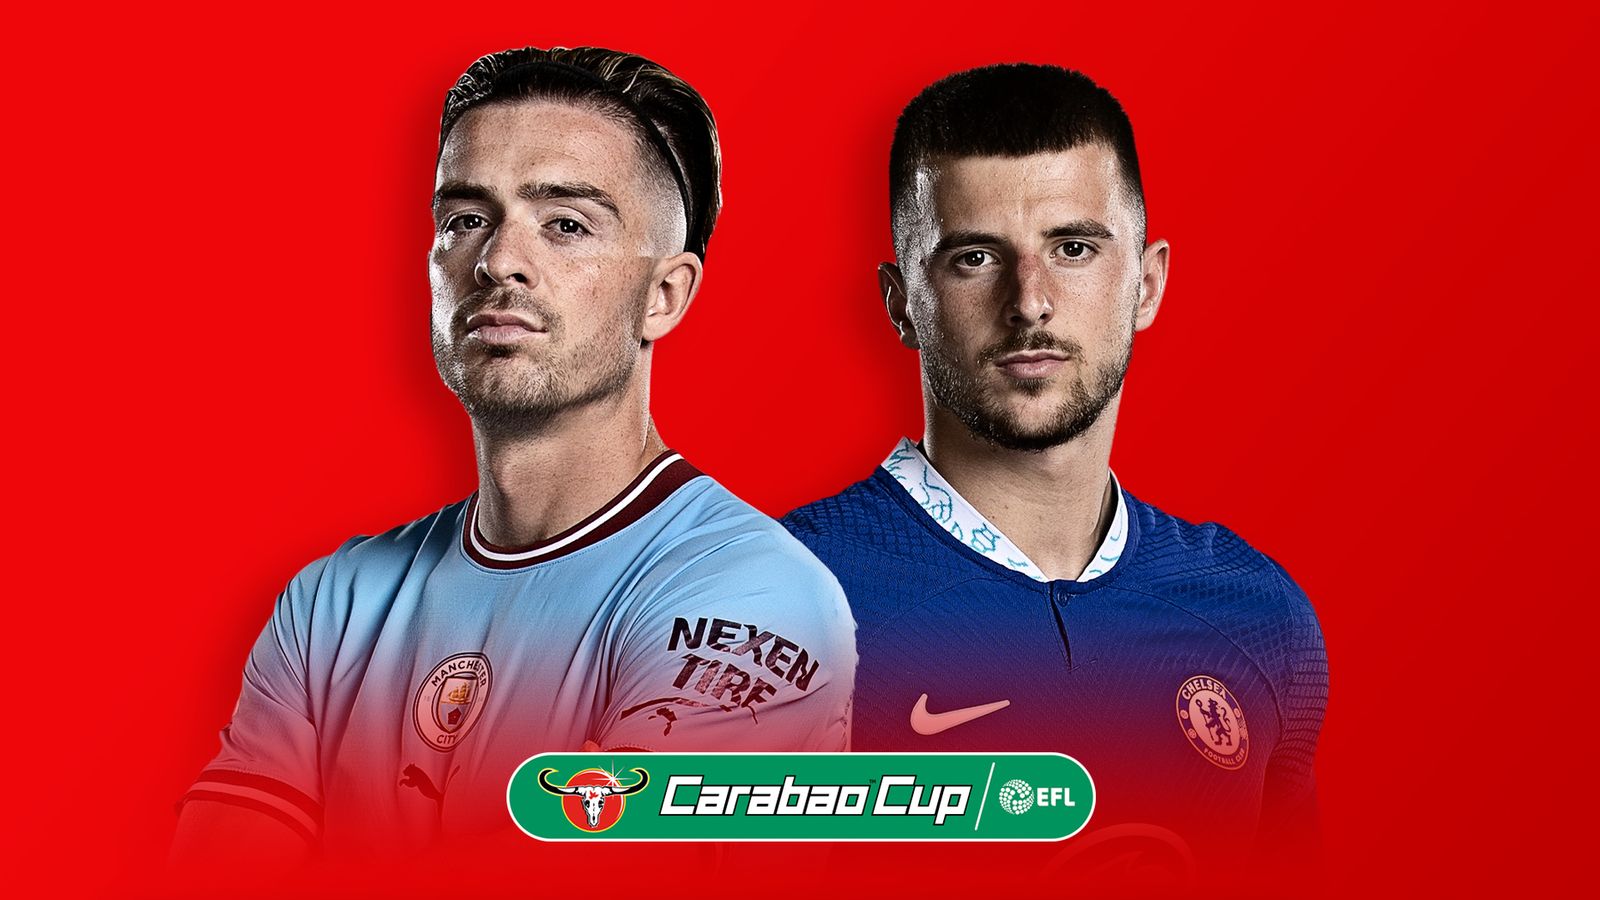 Carabao Cup third round preview: Man City vs Chelsea live on Sky Sports plus team news, match stats, how to watch free highlights – Sky Sports